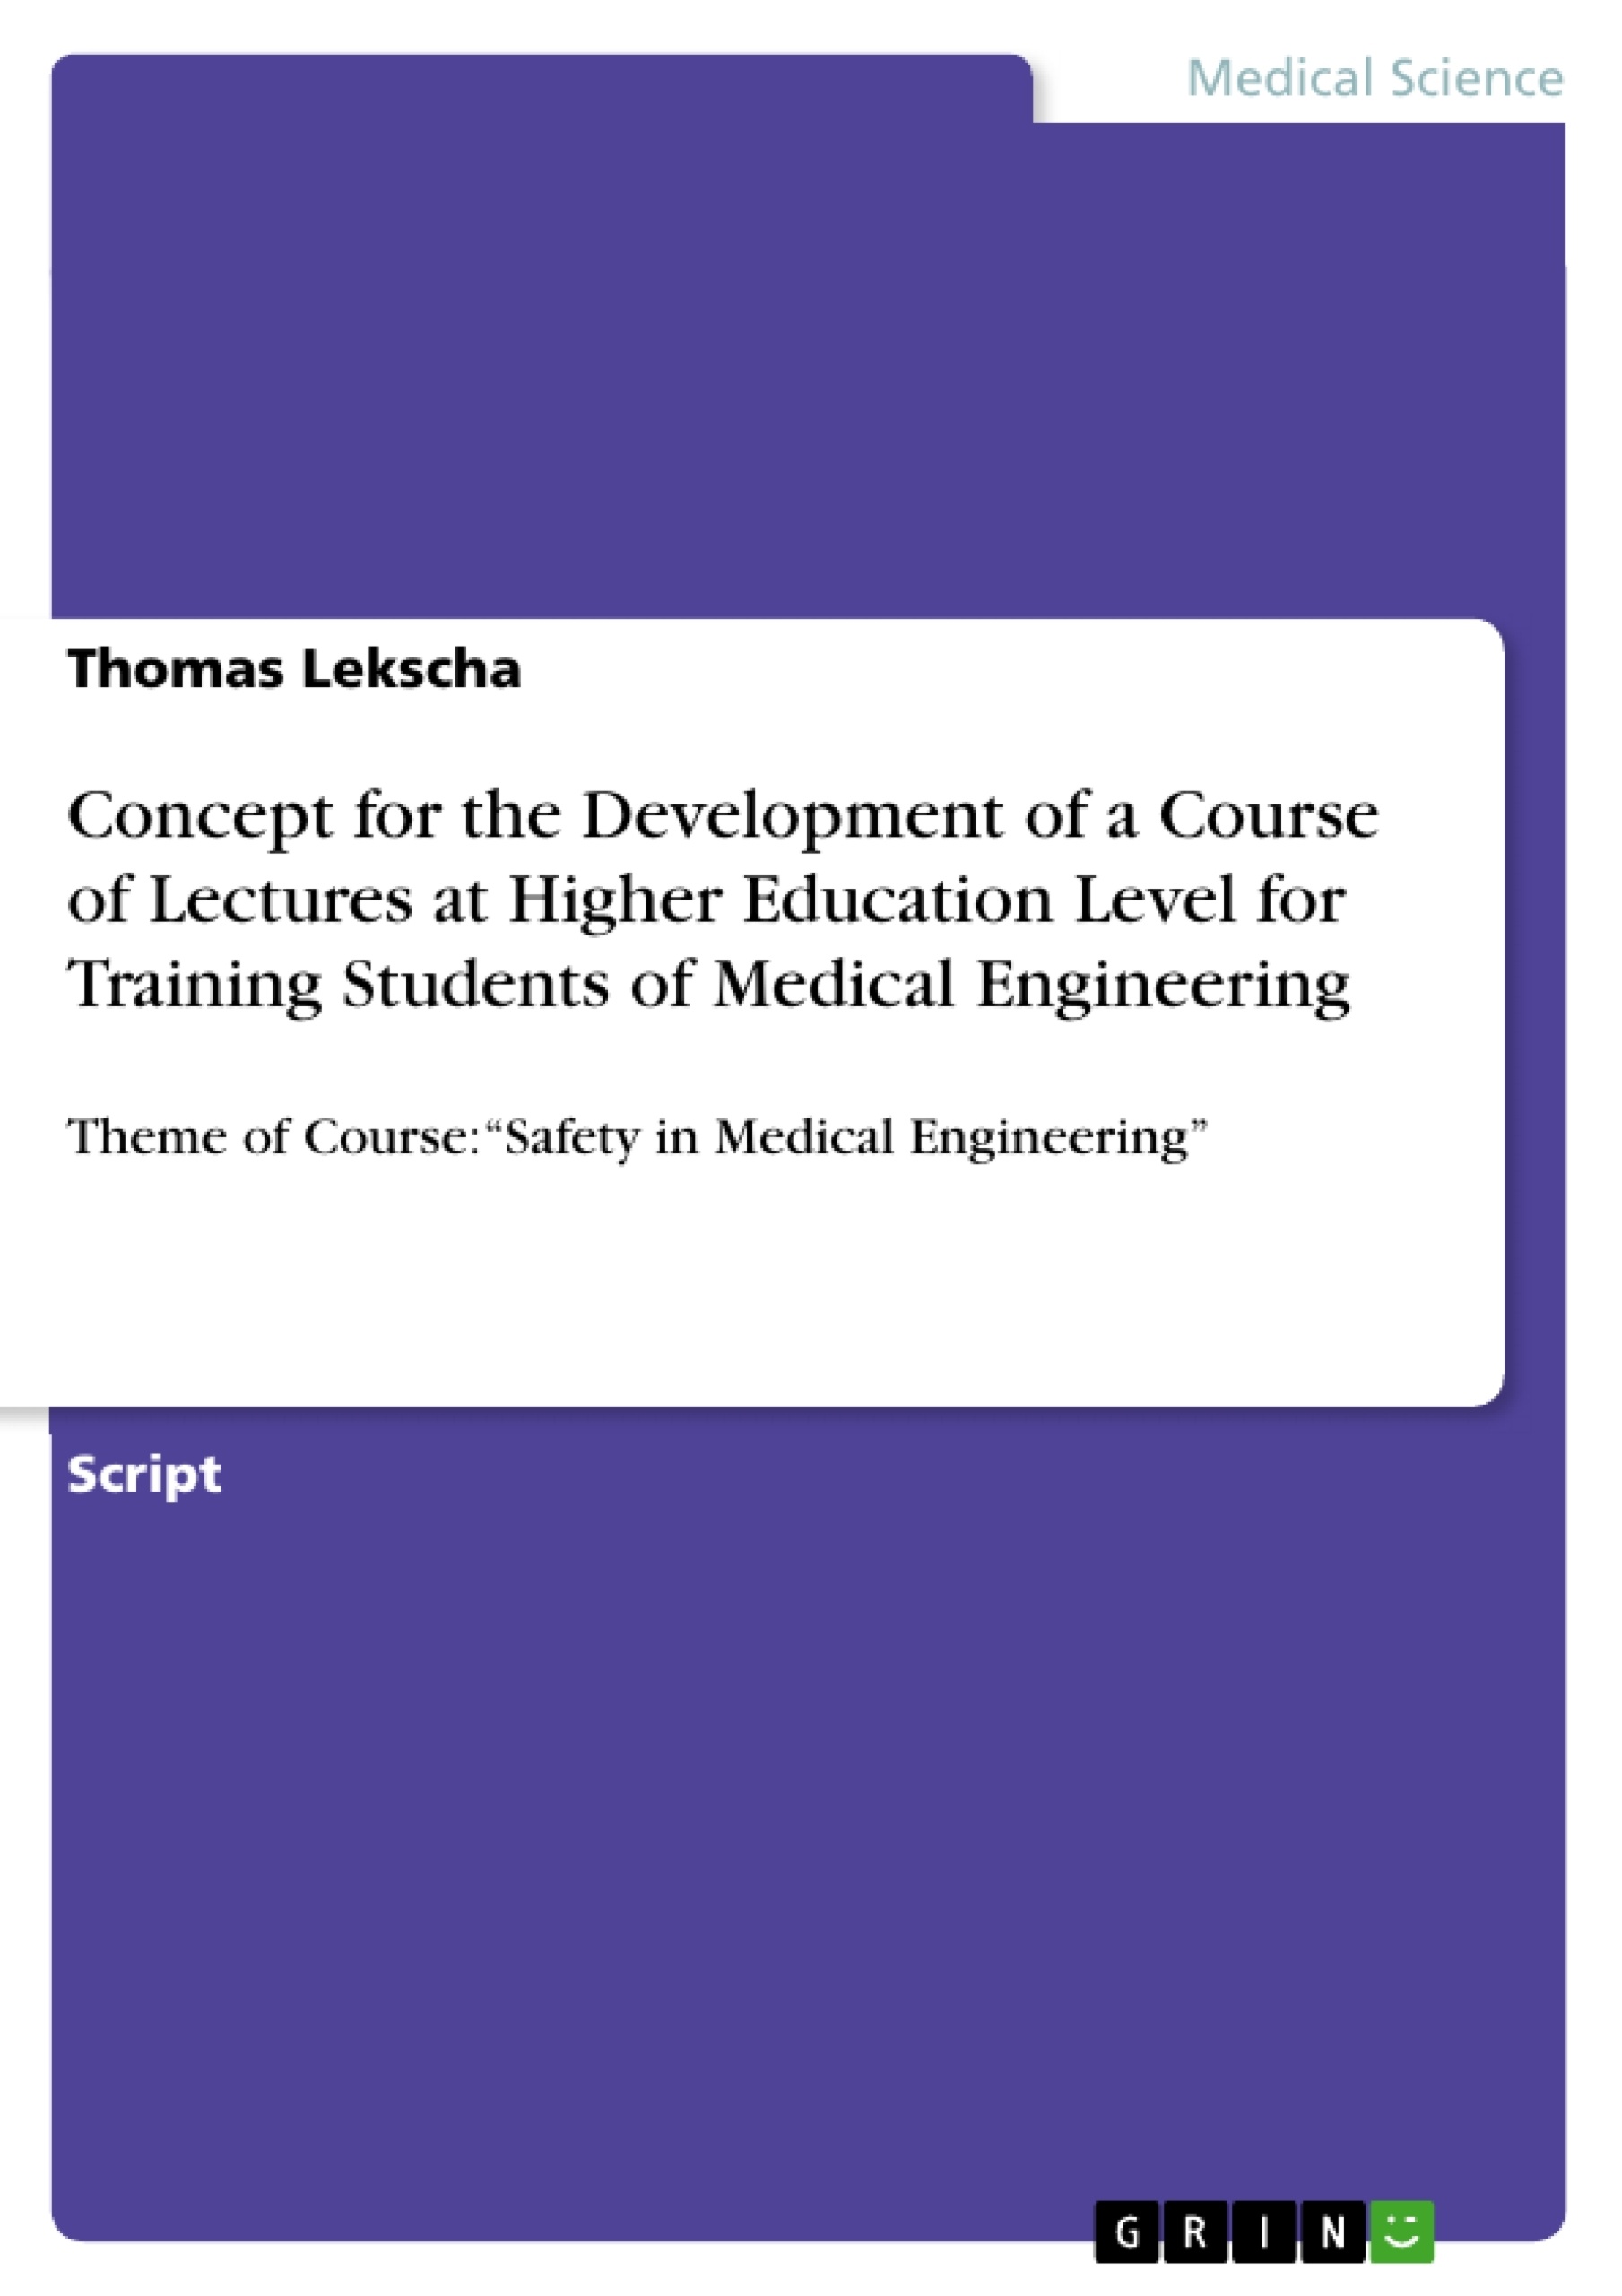 Title: Concept for the Development of a Course of Lectures at Higher Education Level for Training Students of Medical Engineering